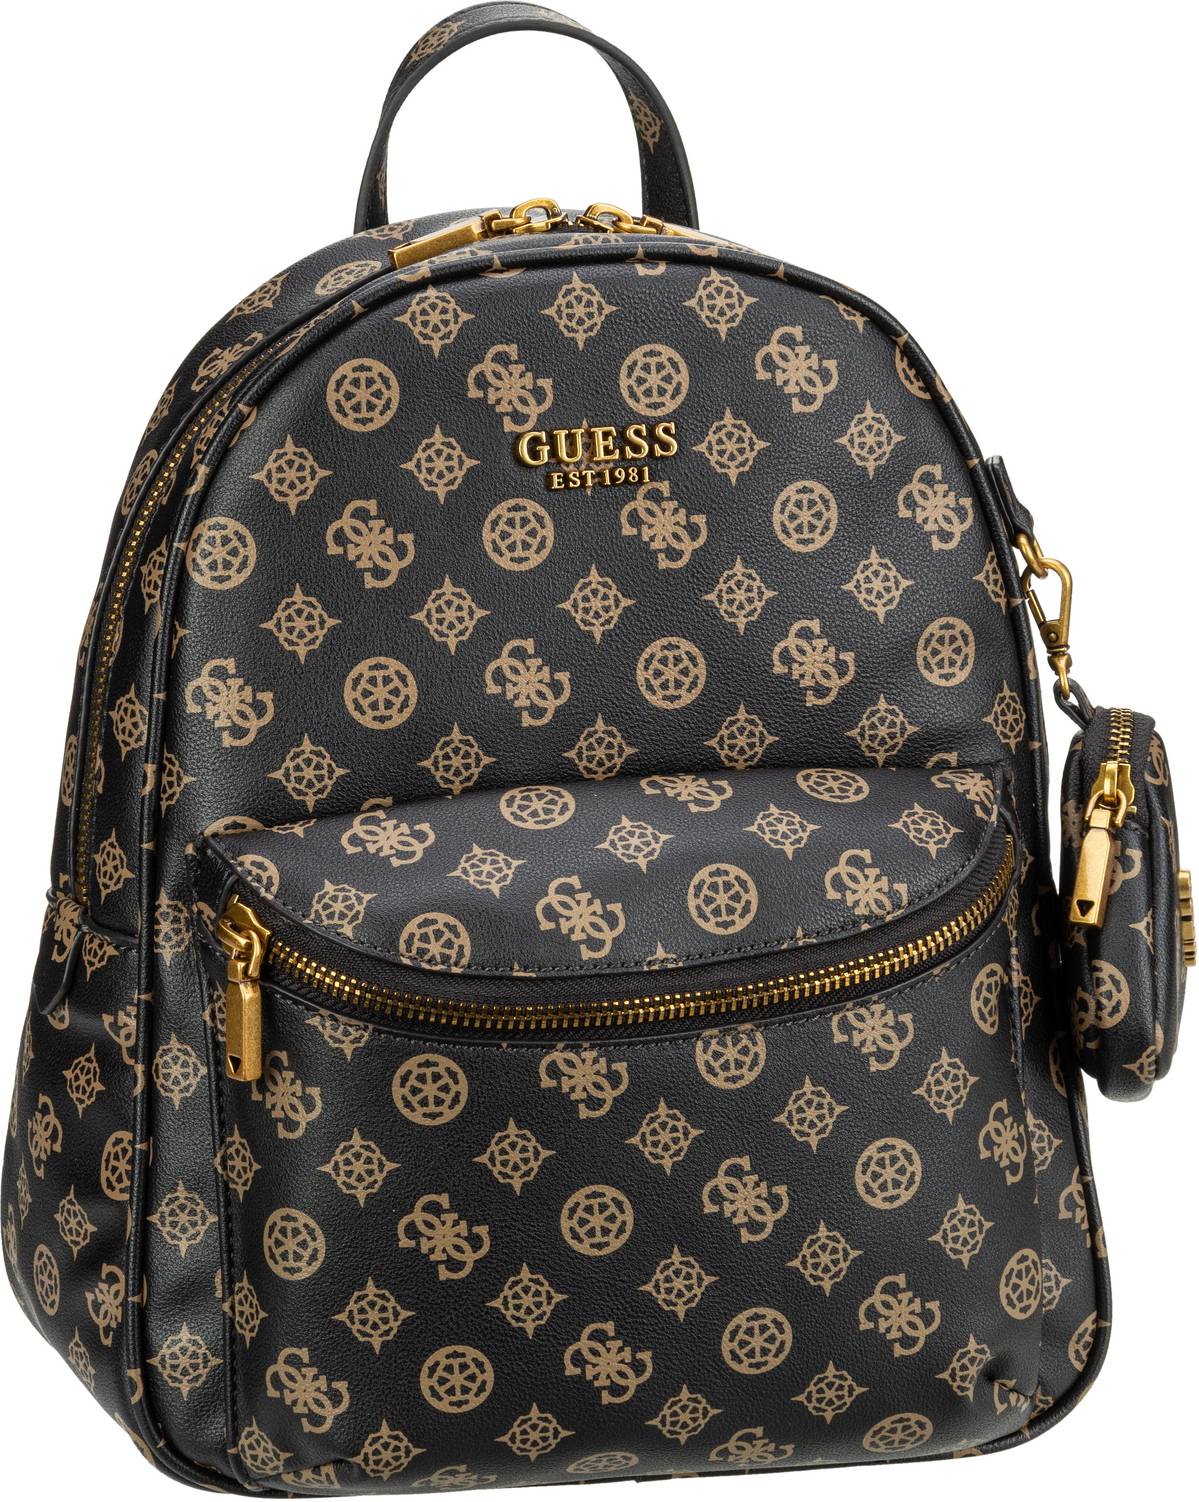 Guess House Party Large Backpack - Mocha Logo